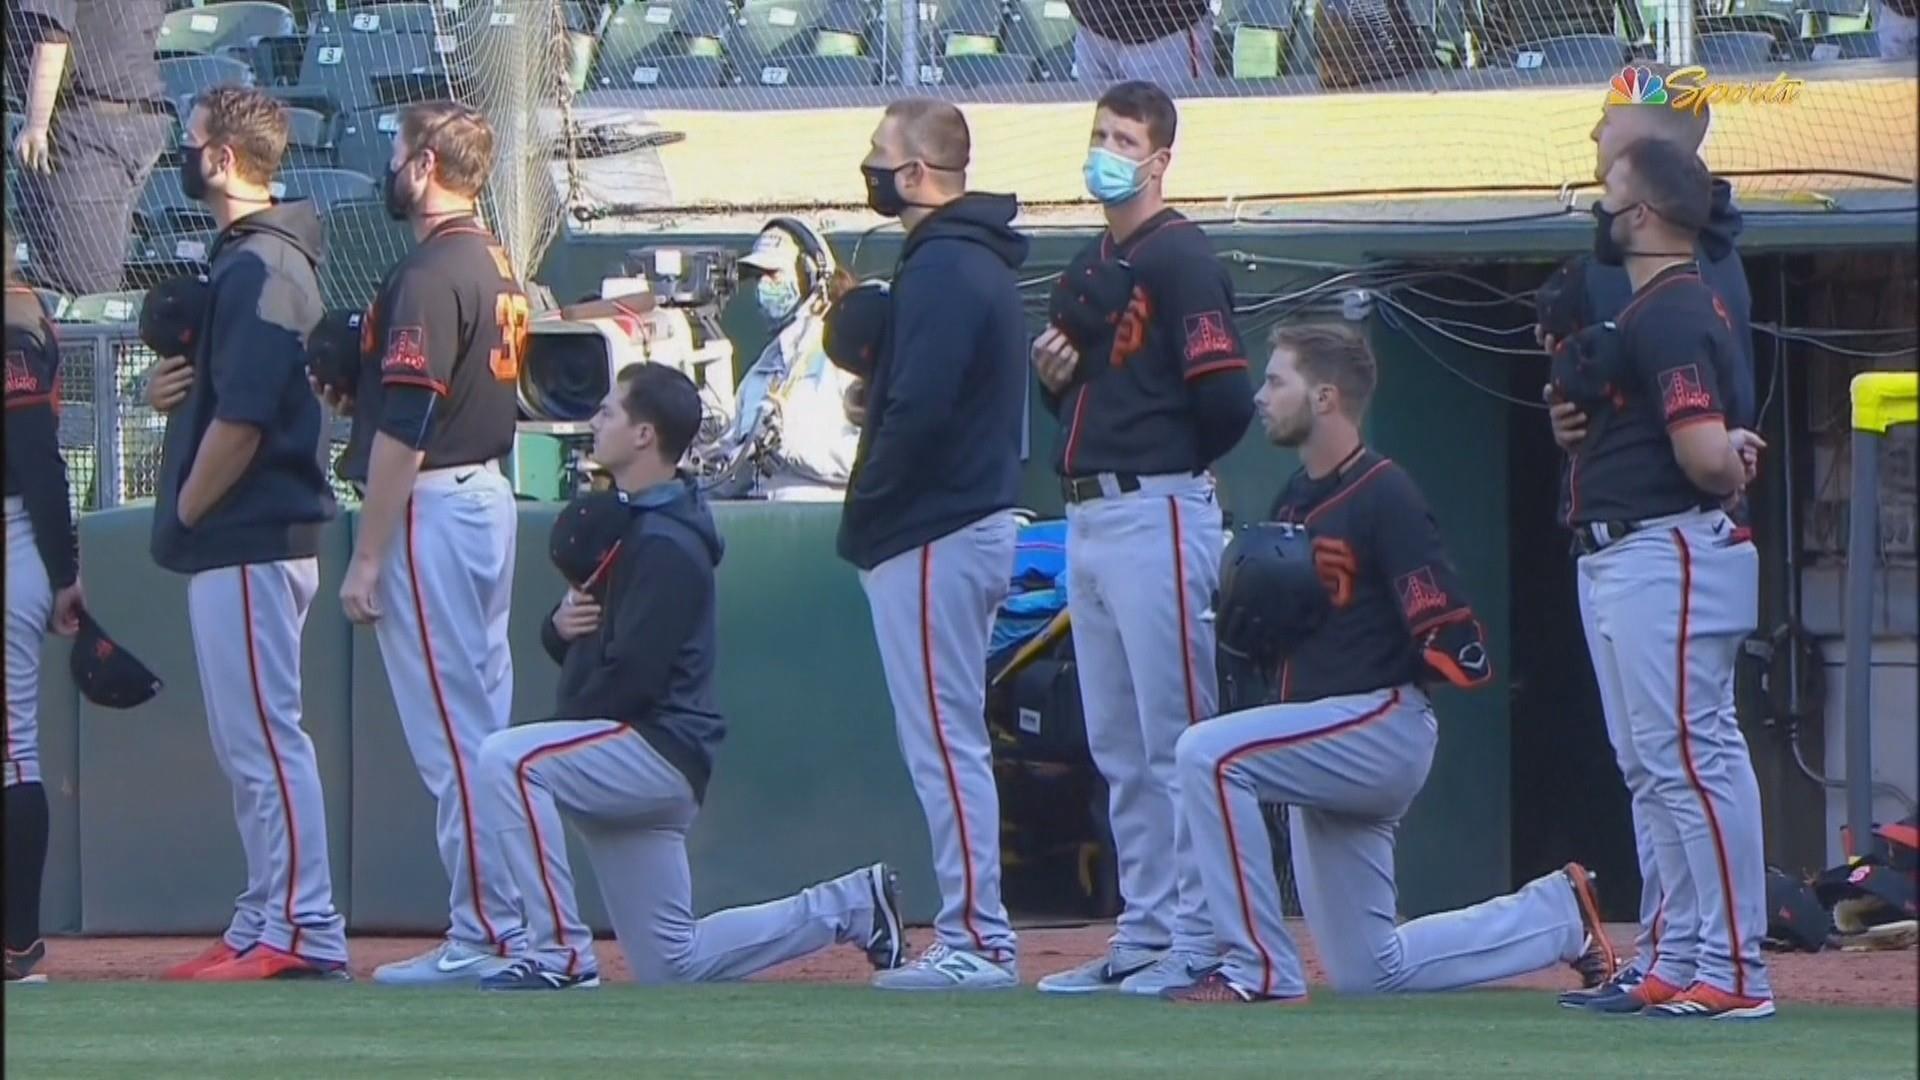 SF Giants Manager Says He Won't Be On Field For Anthem Until